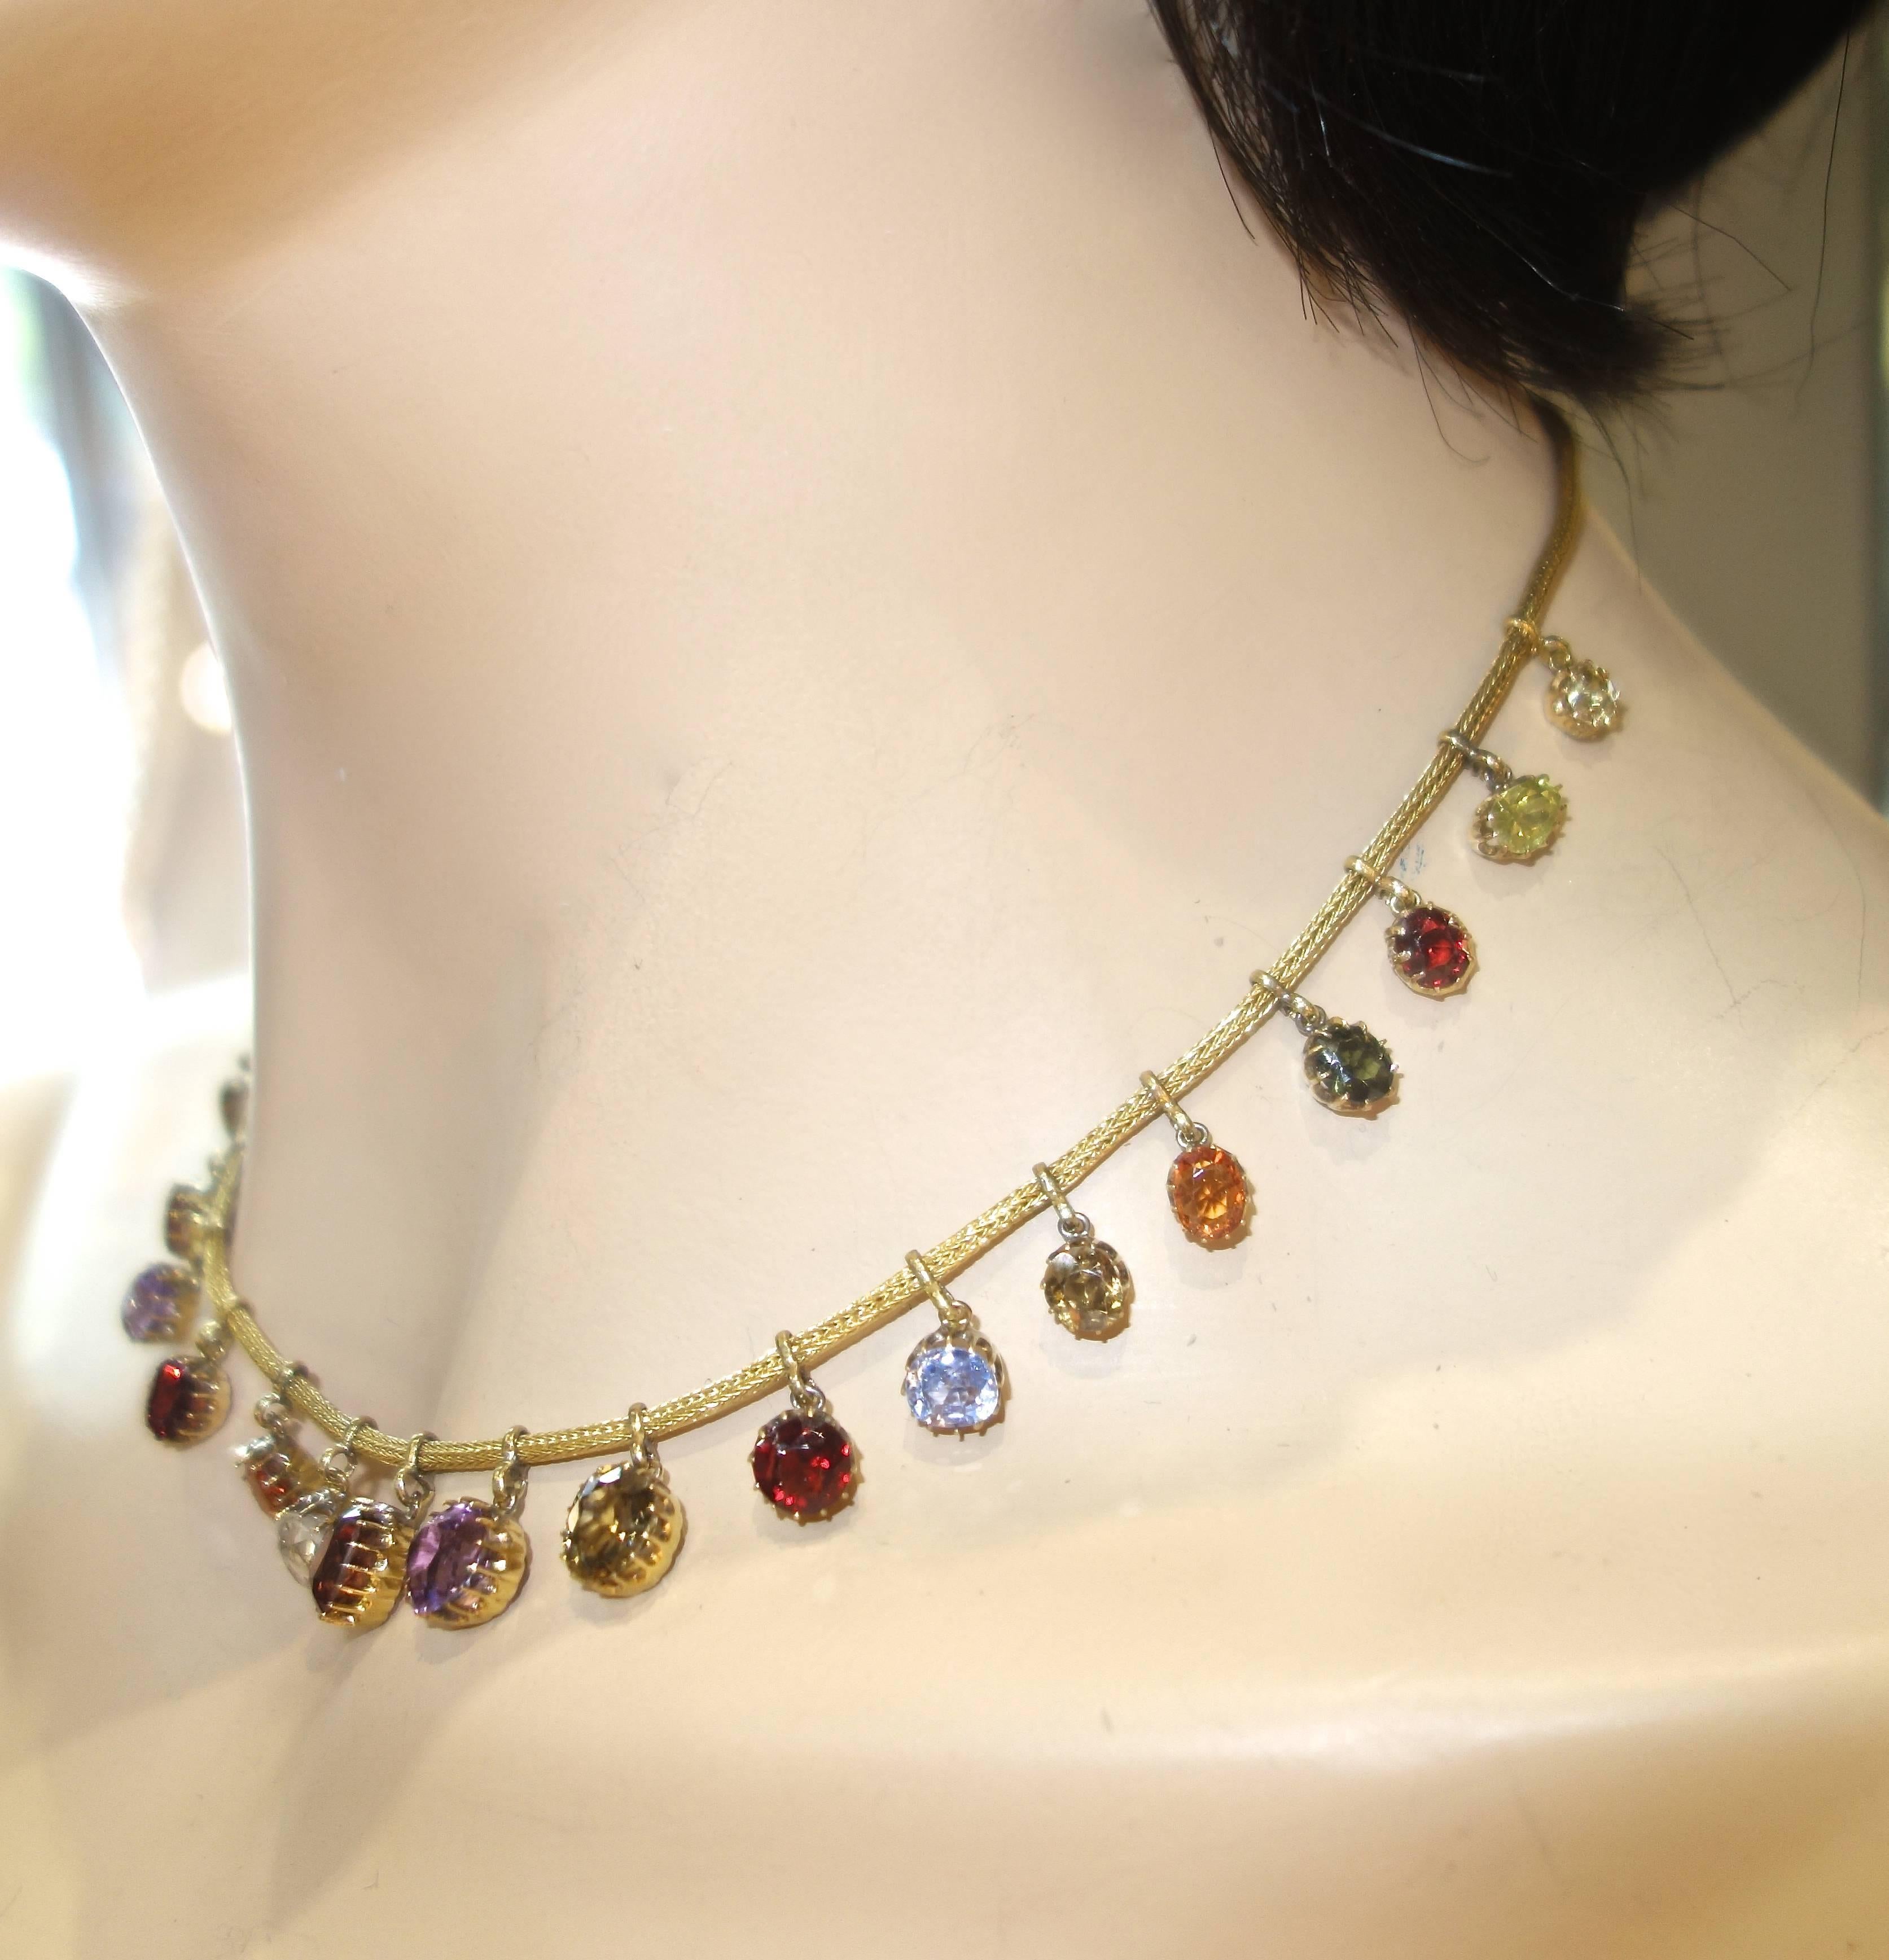 Antique cut with multi prong settings, these 21 natural stones: garnet, citrine, tourmaline, sapphire, zircon, amethyst and peridot are all suspended on a woven gold necklace.  The necklace is 16 inches long.  Colorful and unique, this necklace is